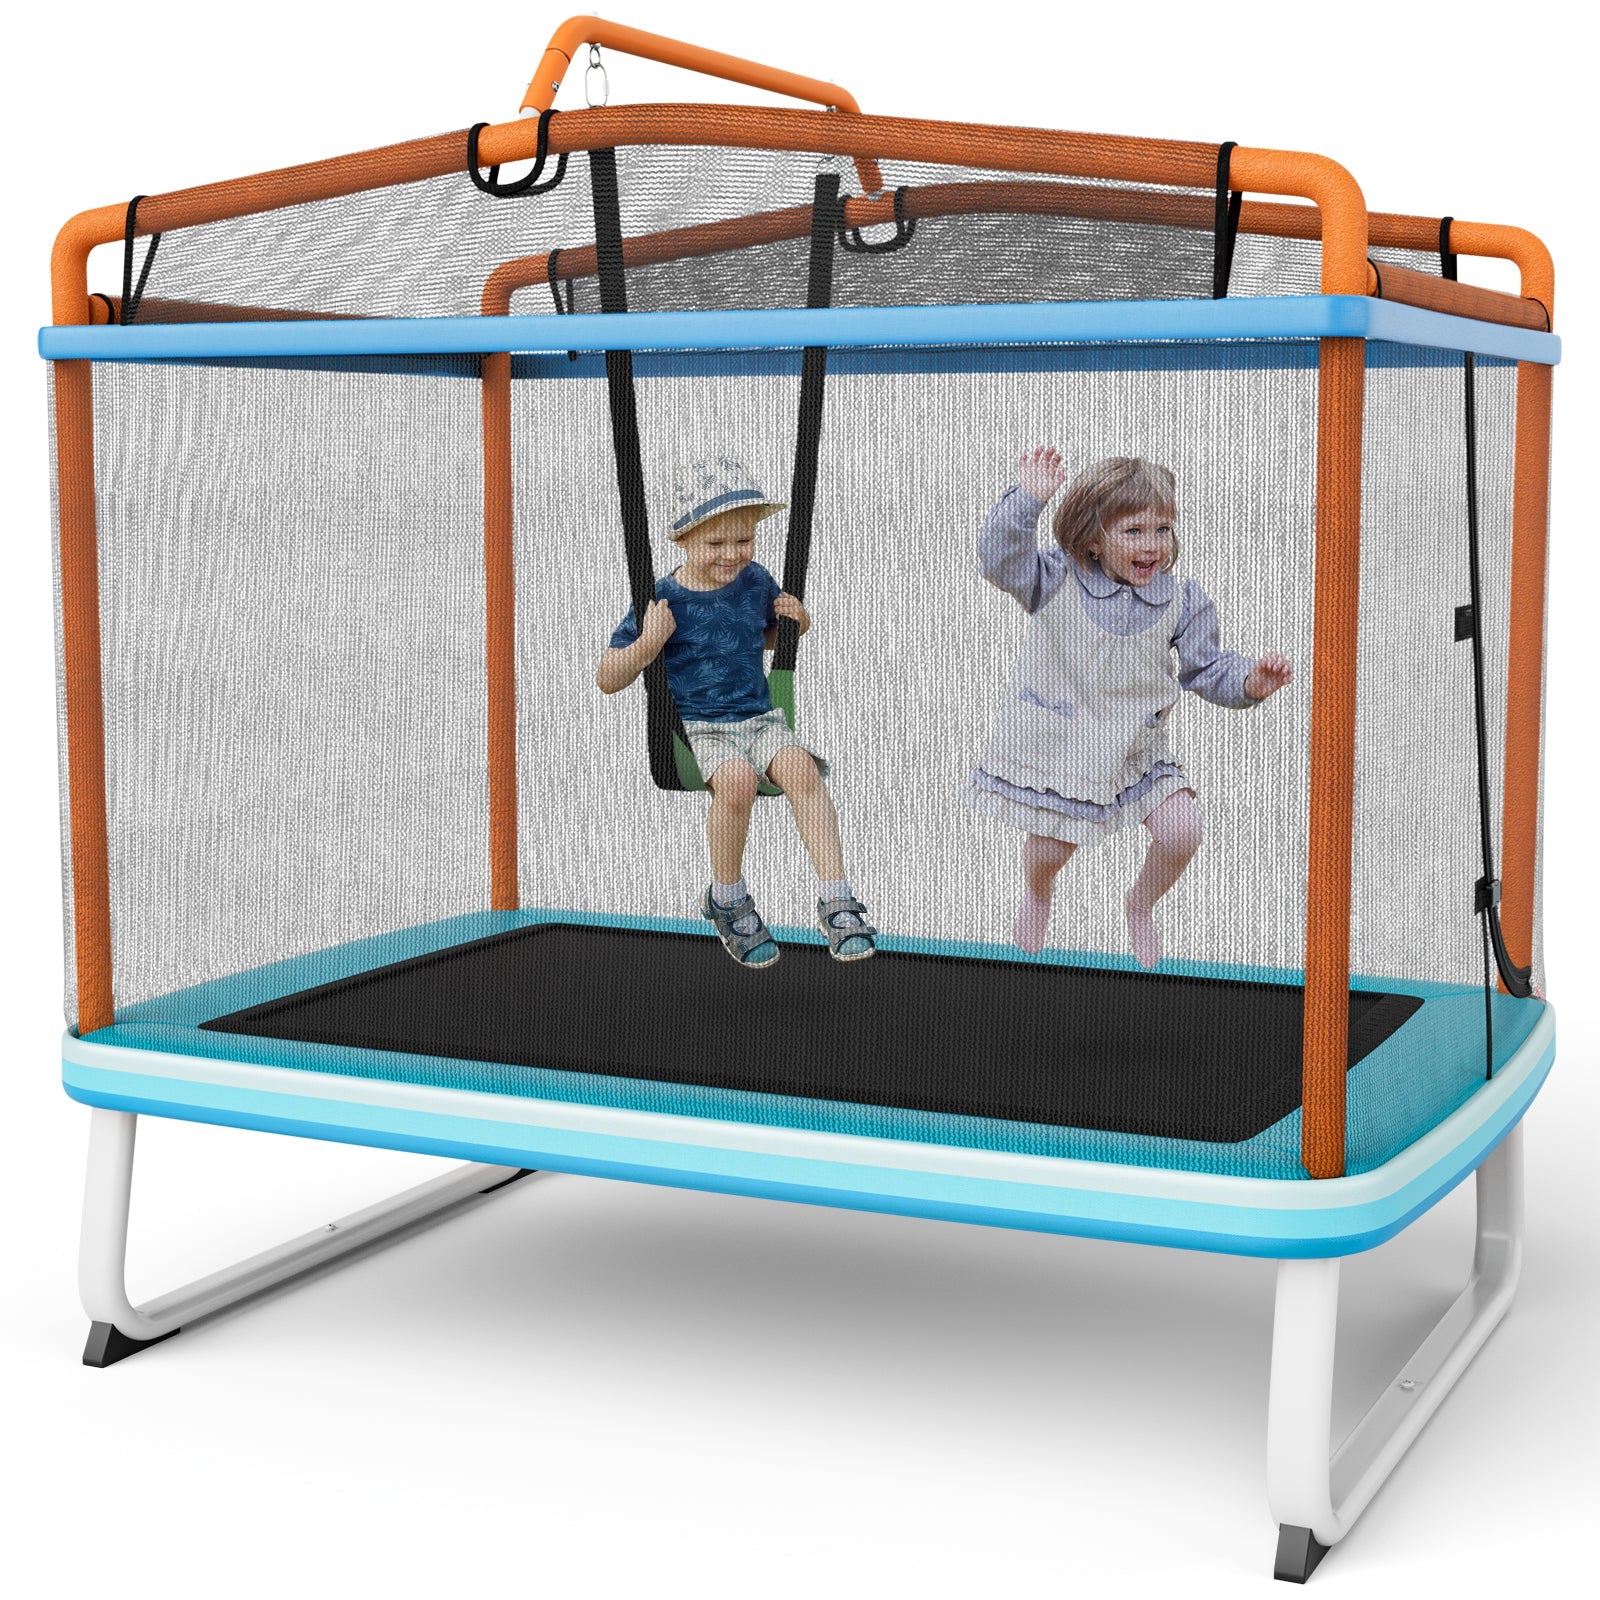 Elevate Playtime: 3-in-1 Rectangle Trampoline with Swing & Horizontal Bar Orange